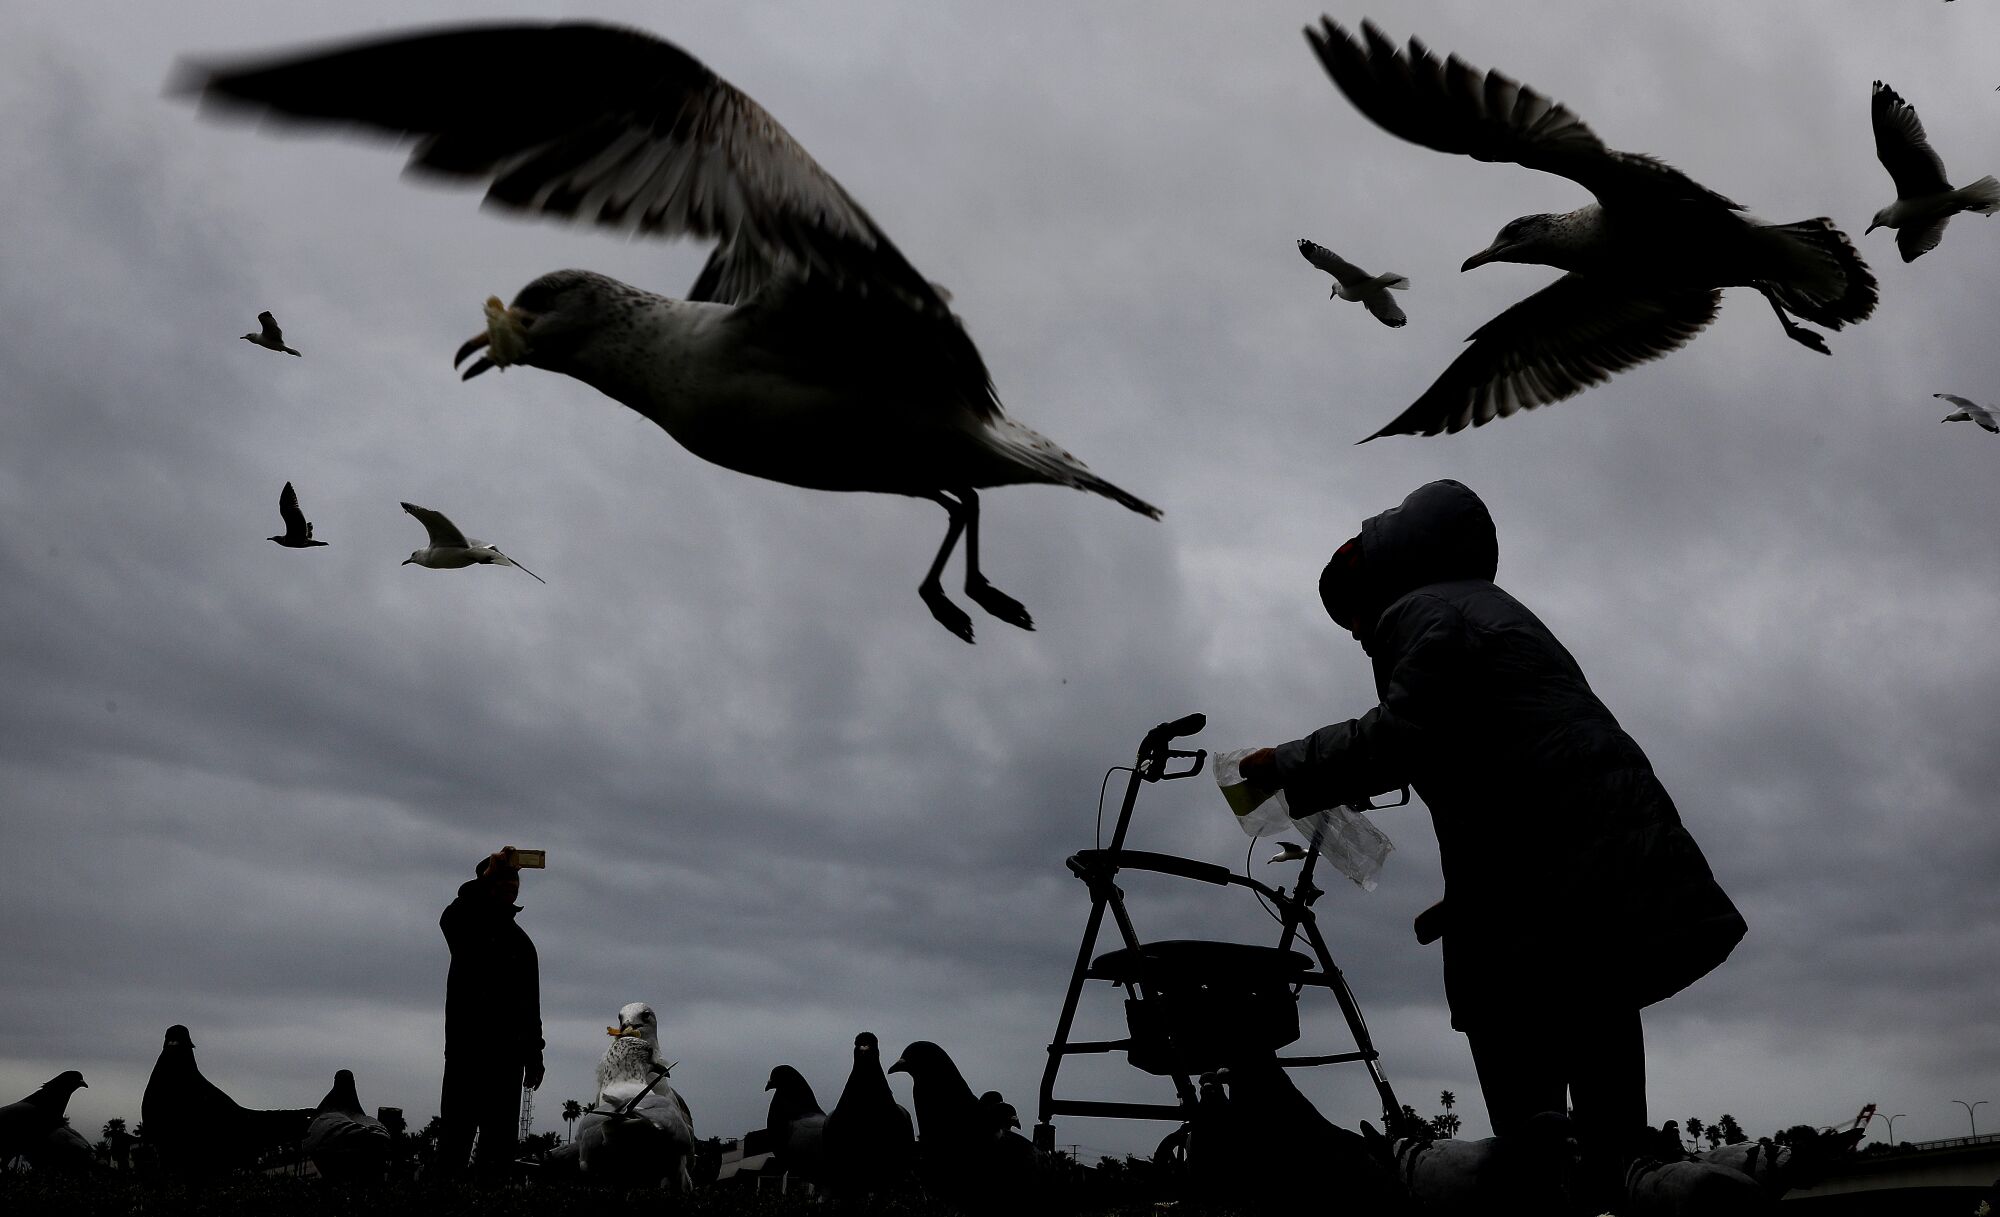 A silhouette of a person with a walker and birds swarming the upper part of the frame.